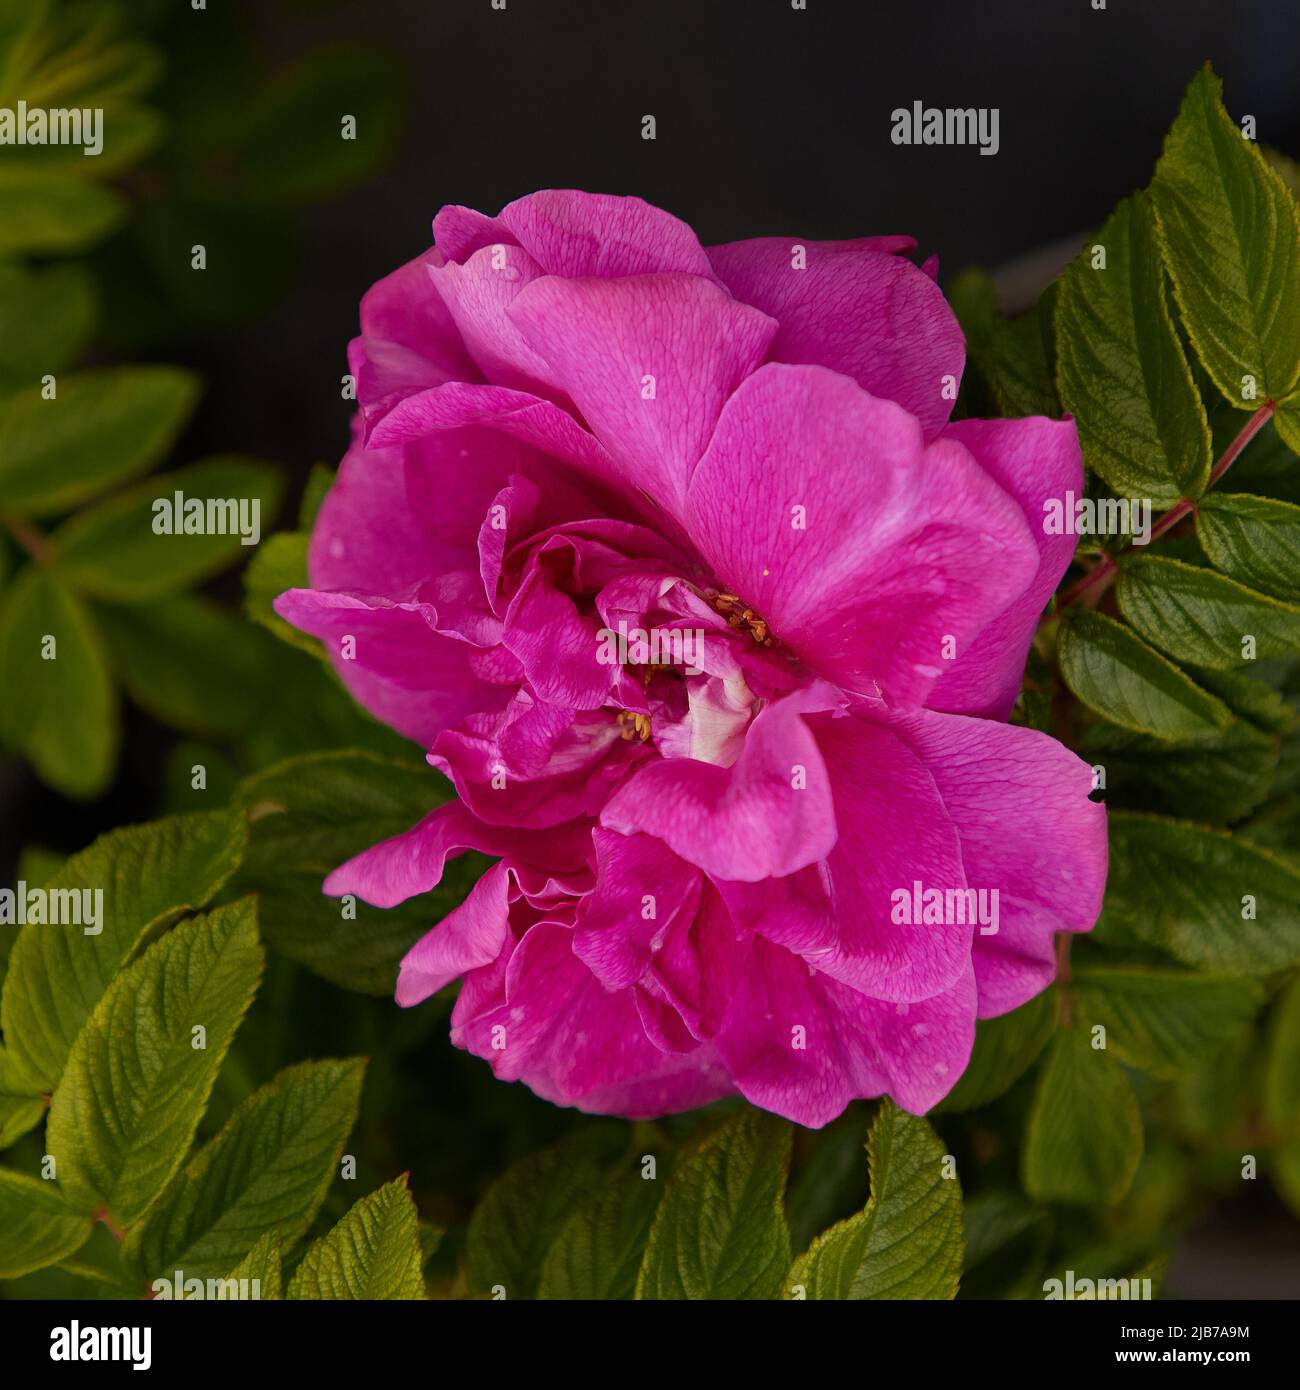 Close up of the old heritage Rosa Roserie de L'Hay, Rugosa shrub rose seen in natural light. Stock Photo